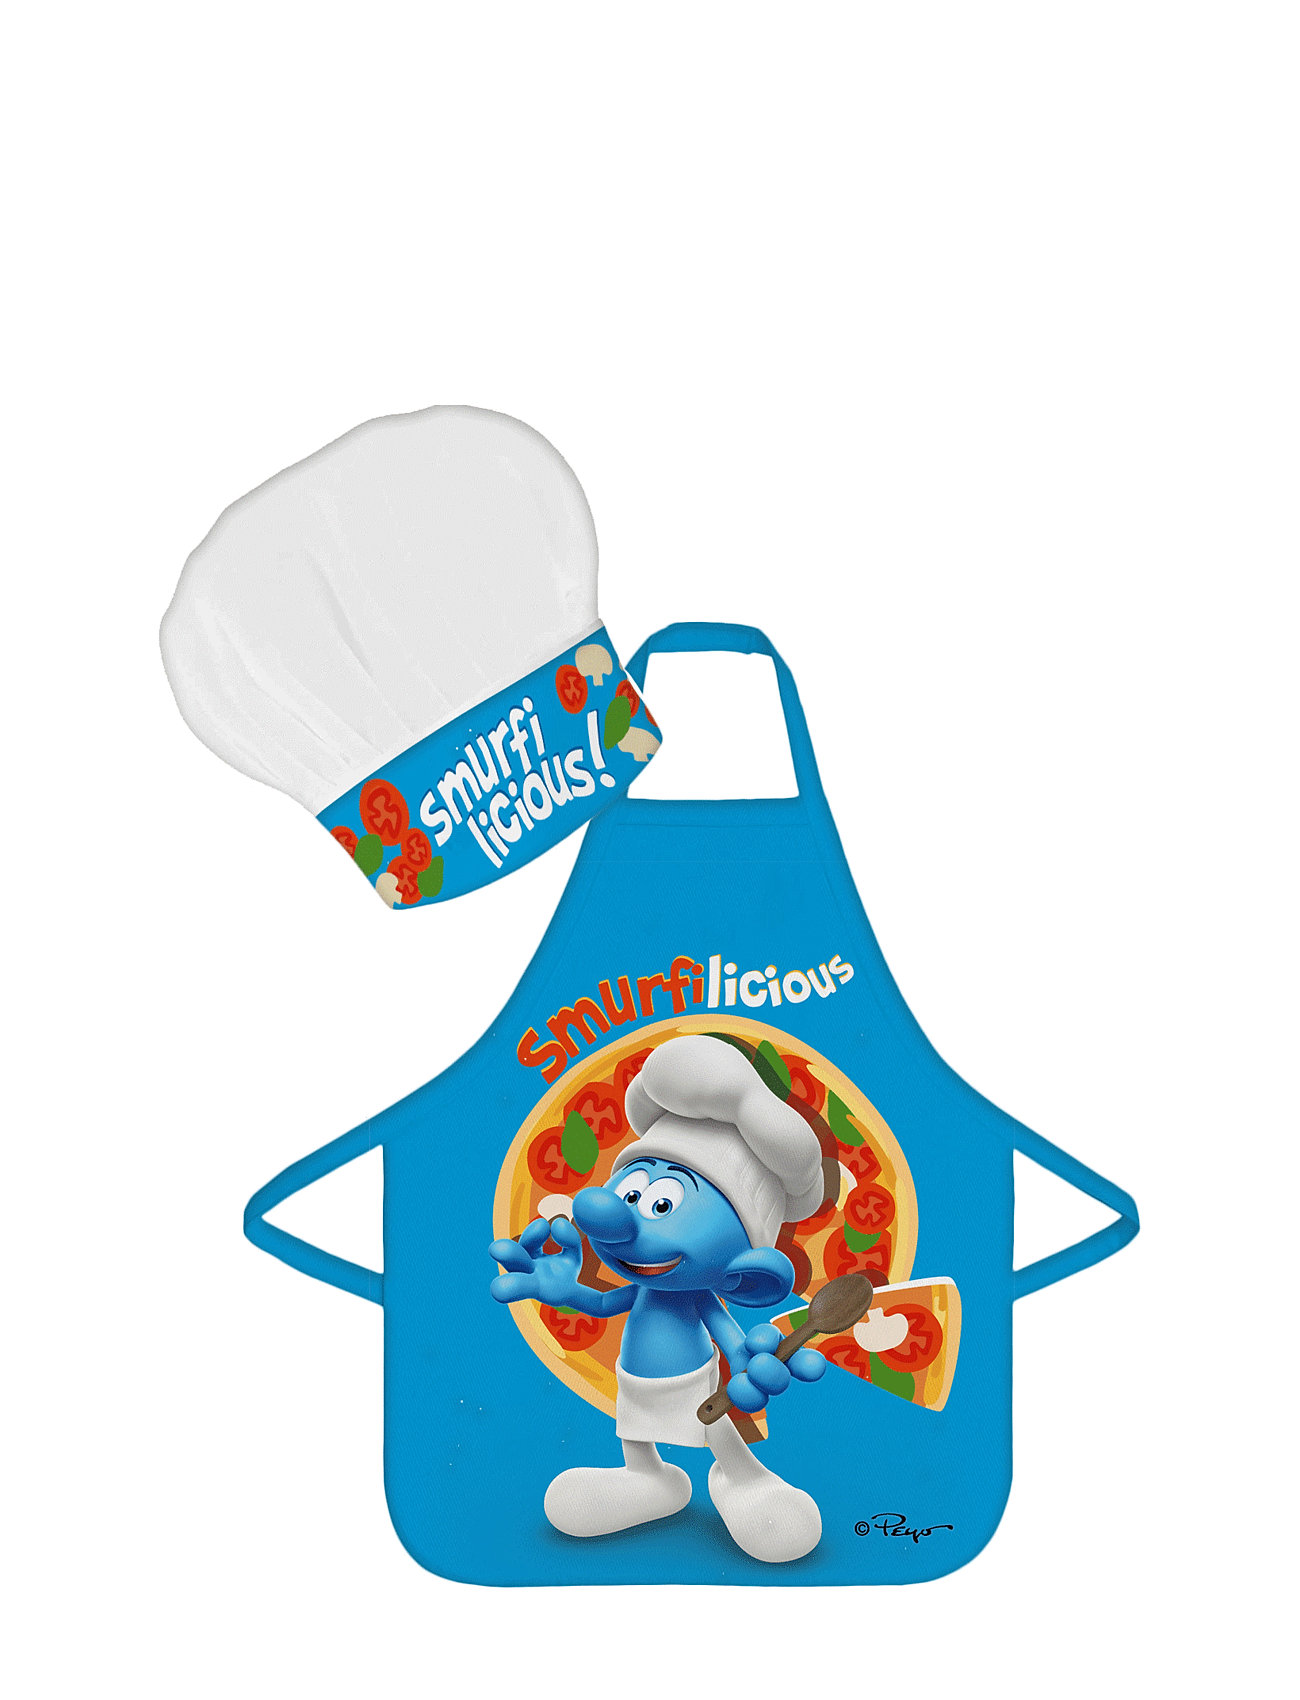 Kids Apron + Hat - The Smurfs - Ts 1003 Blue Home Meal Time Baking & Cooking Aprons Multi/patterned BrandMac